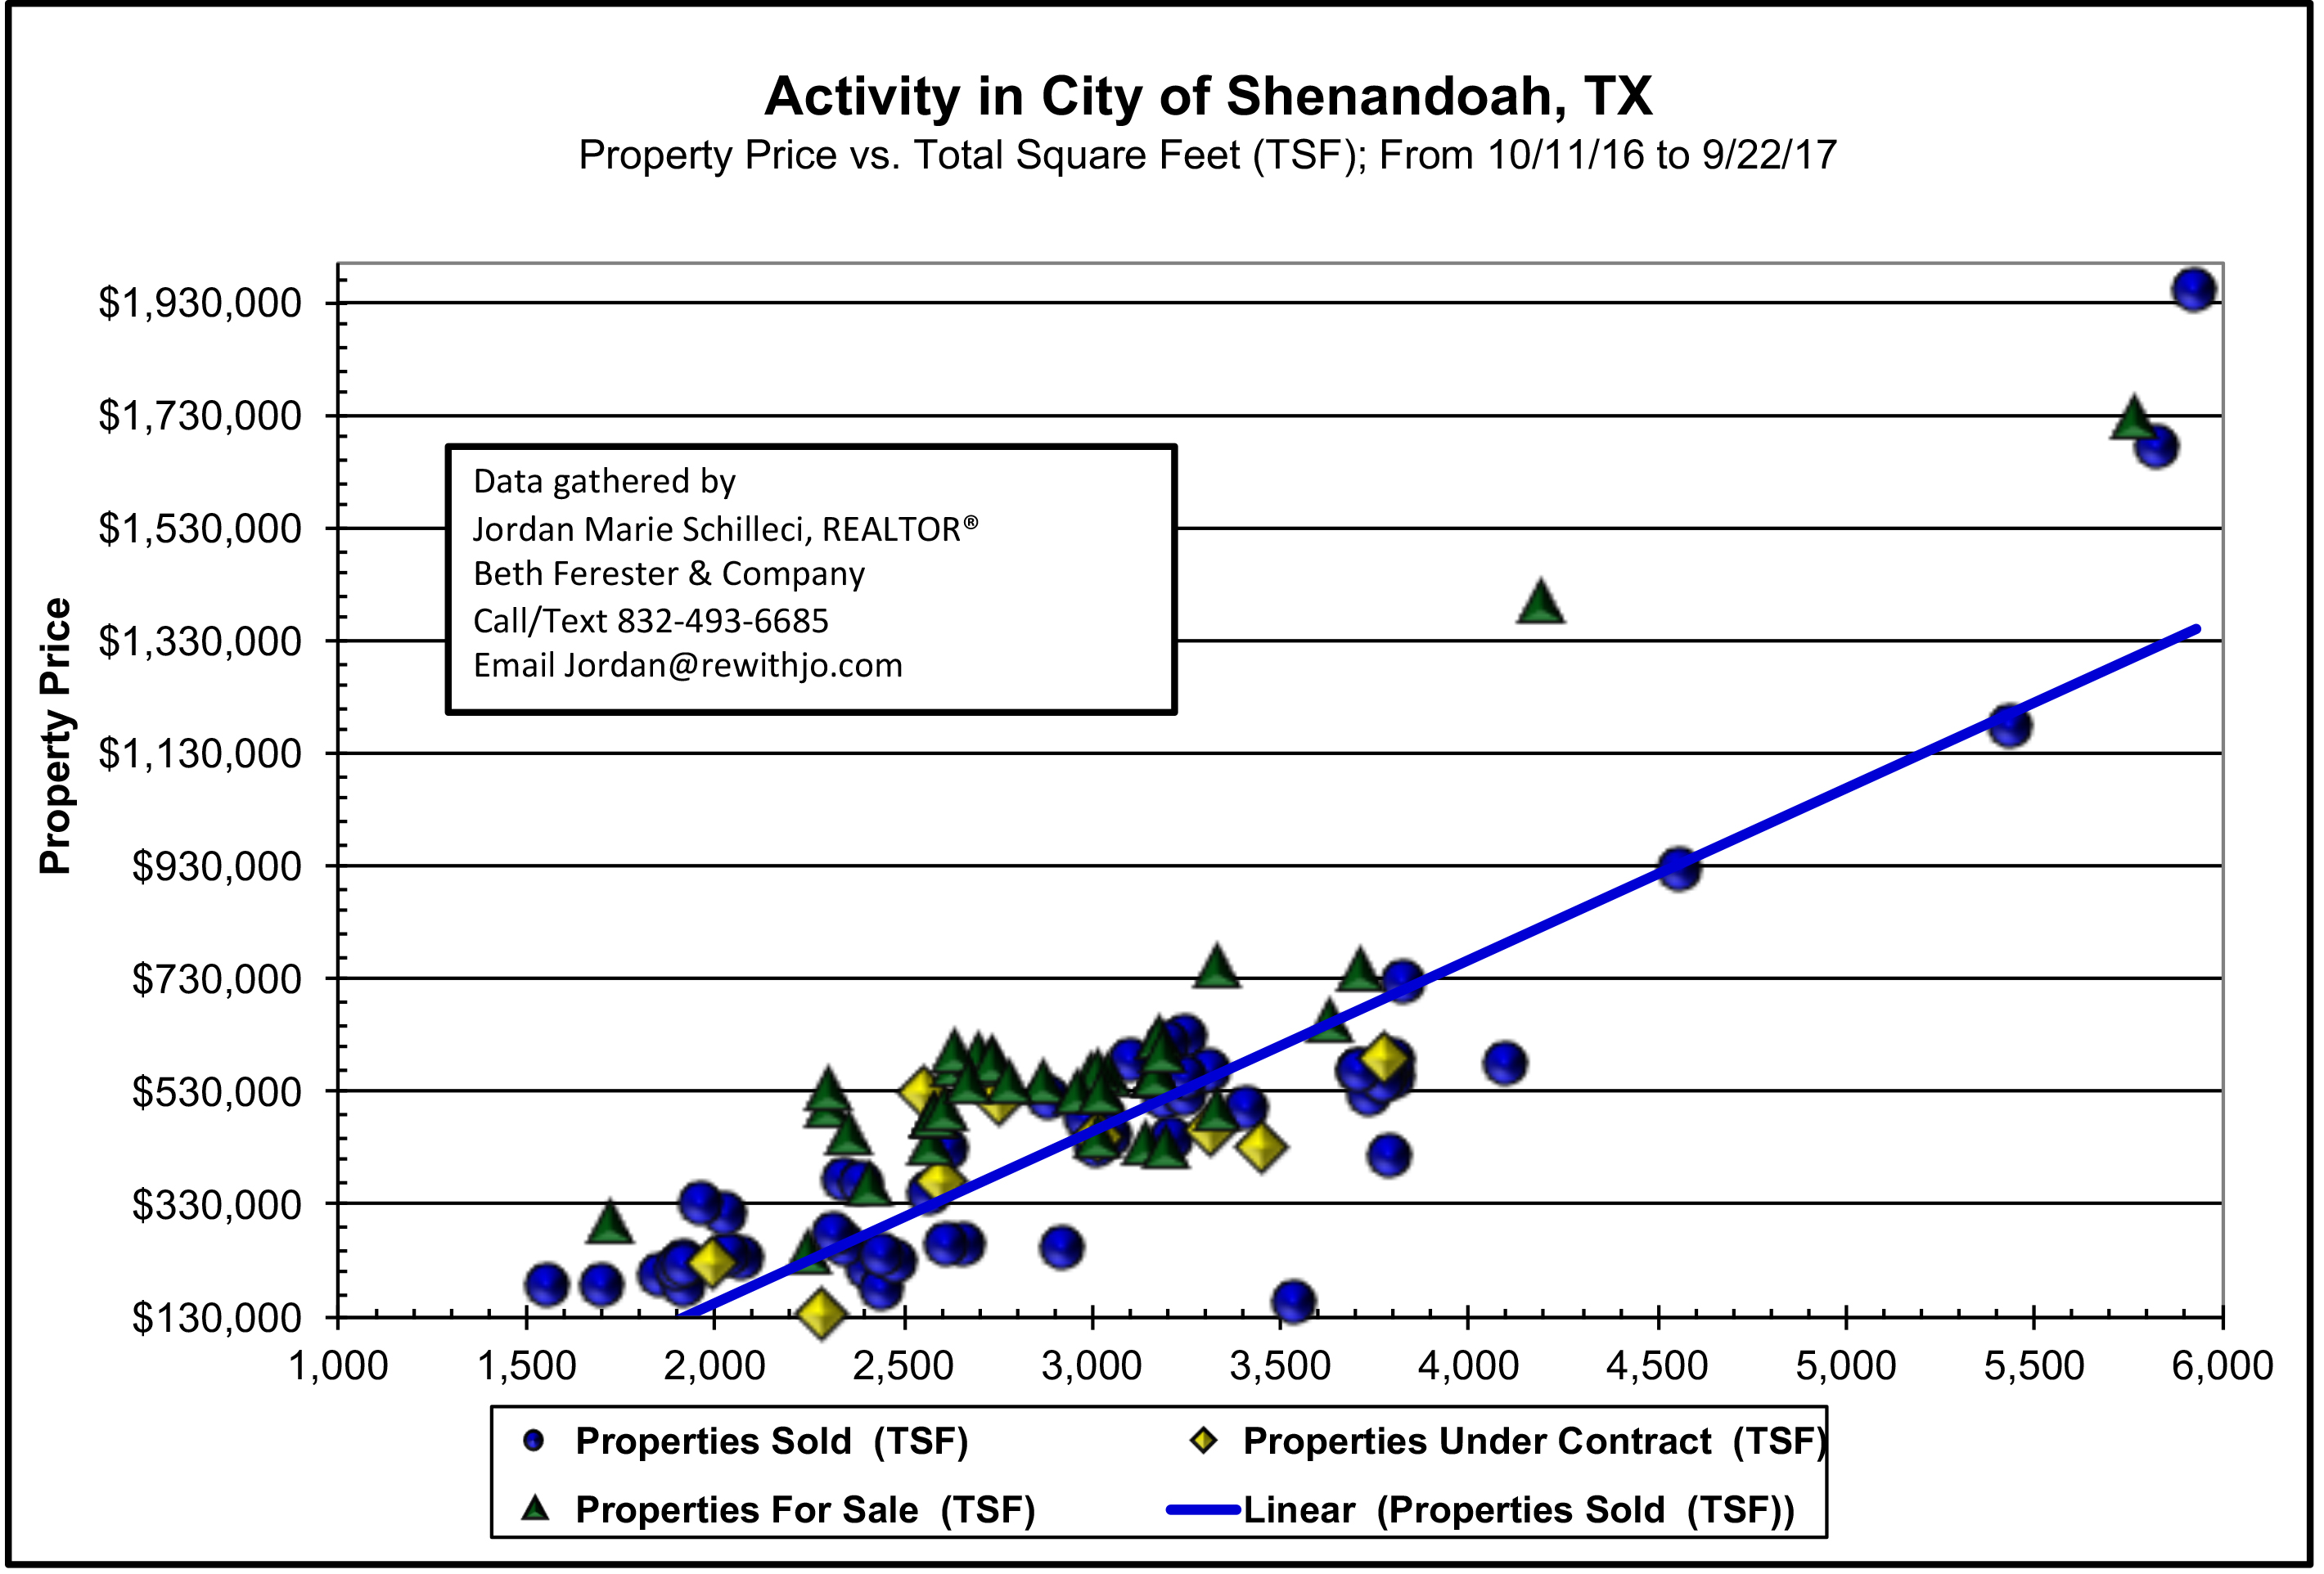 shenandoah tx market update october 2017 scattergram prices of home selling and for sale